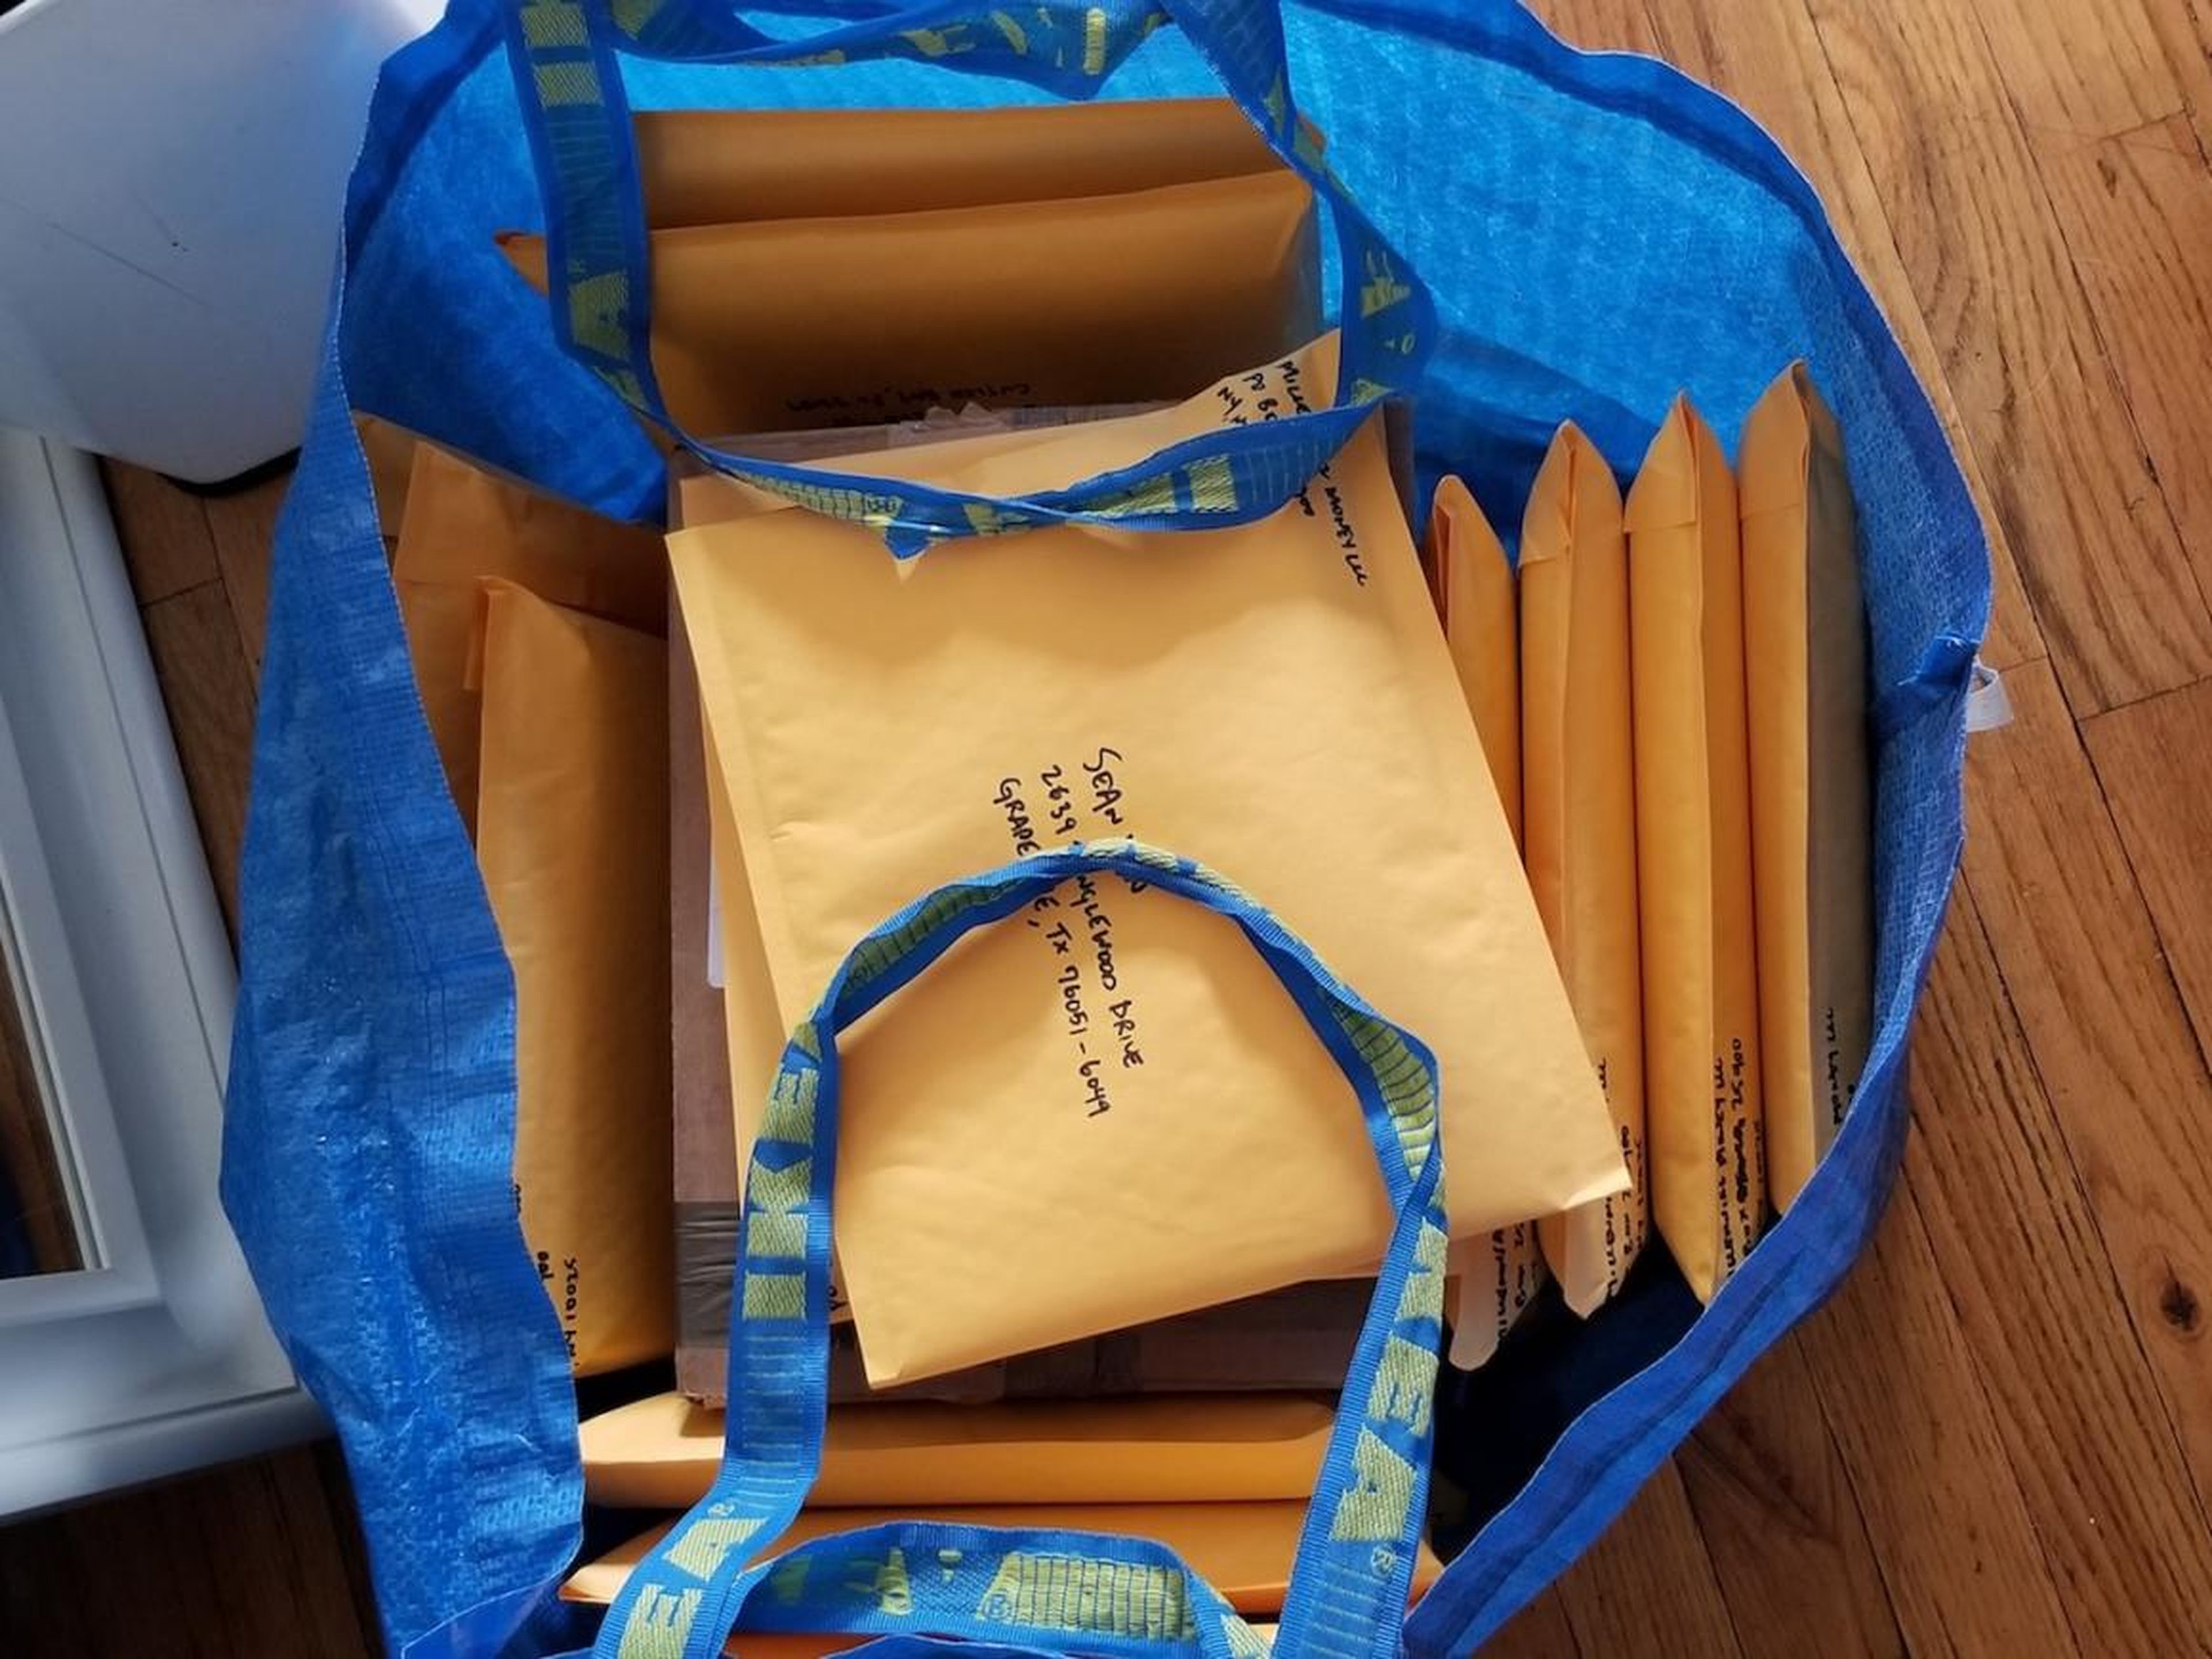 Around 9 a.m., Sabatier heads to the local post office to mail signed copies of his book. He typically ships out about 40 copies every week when he's home. By now, he's used to carting books around — Ikea bags work best, he said.